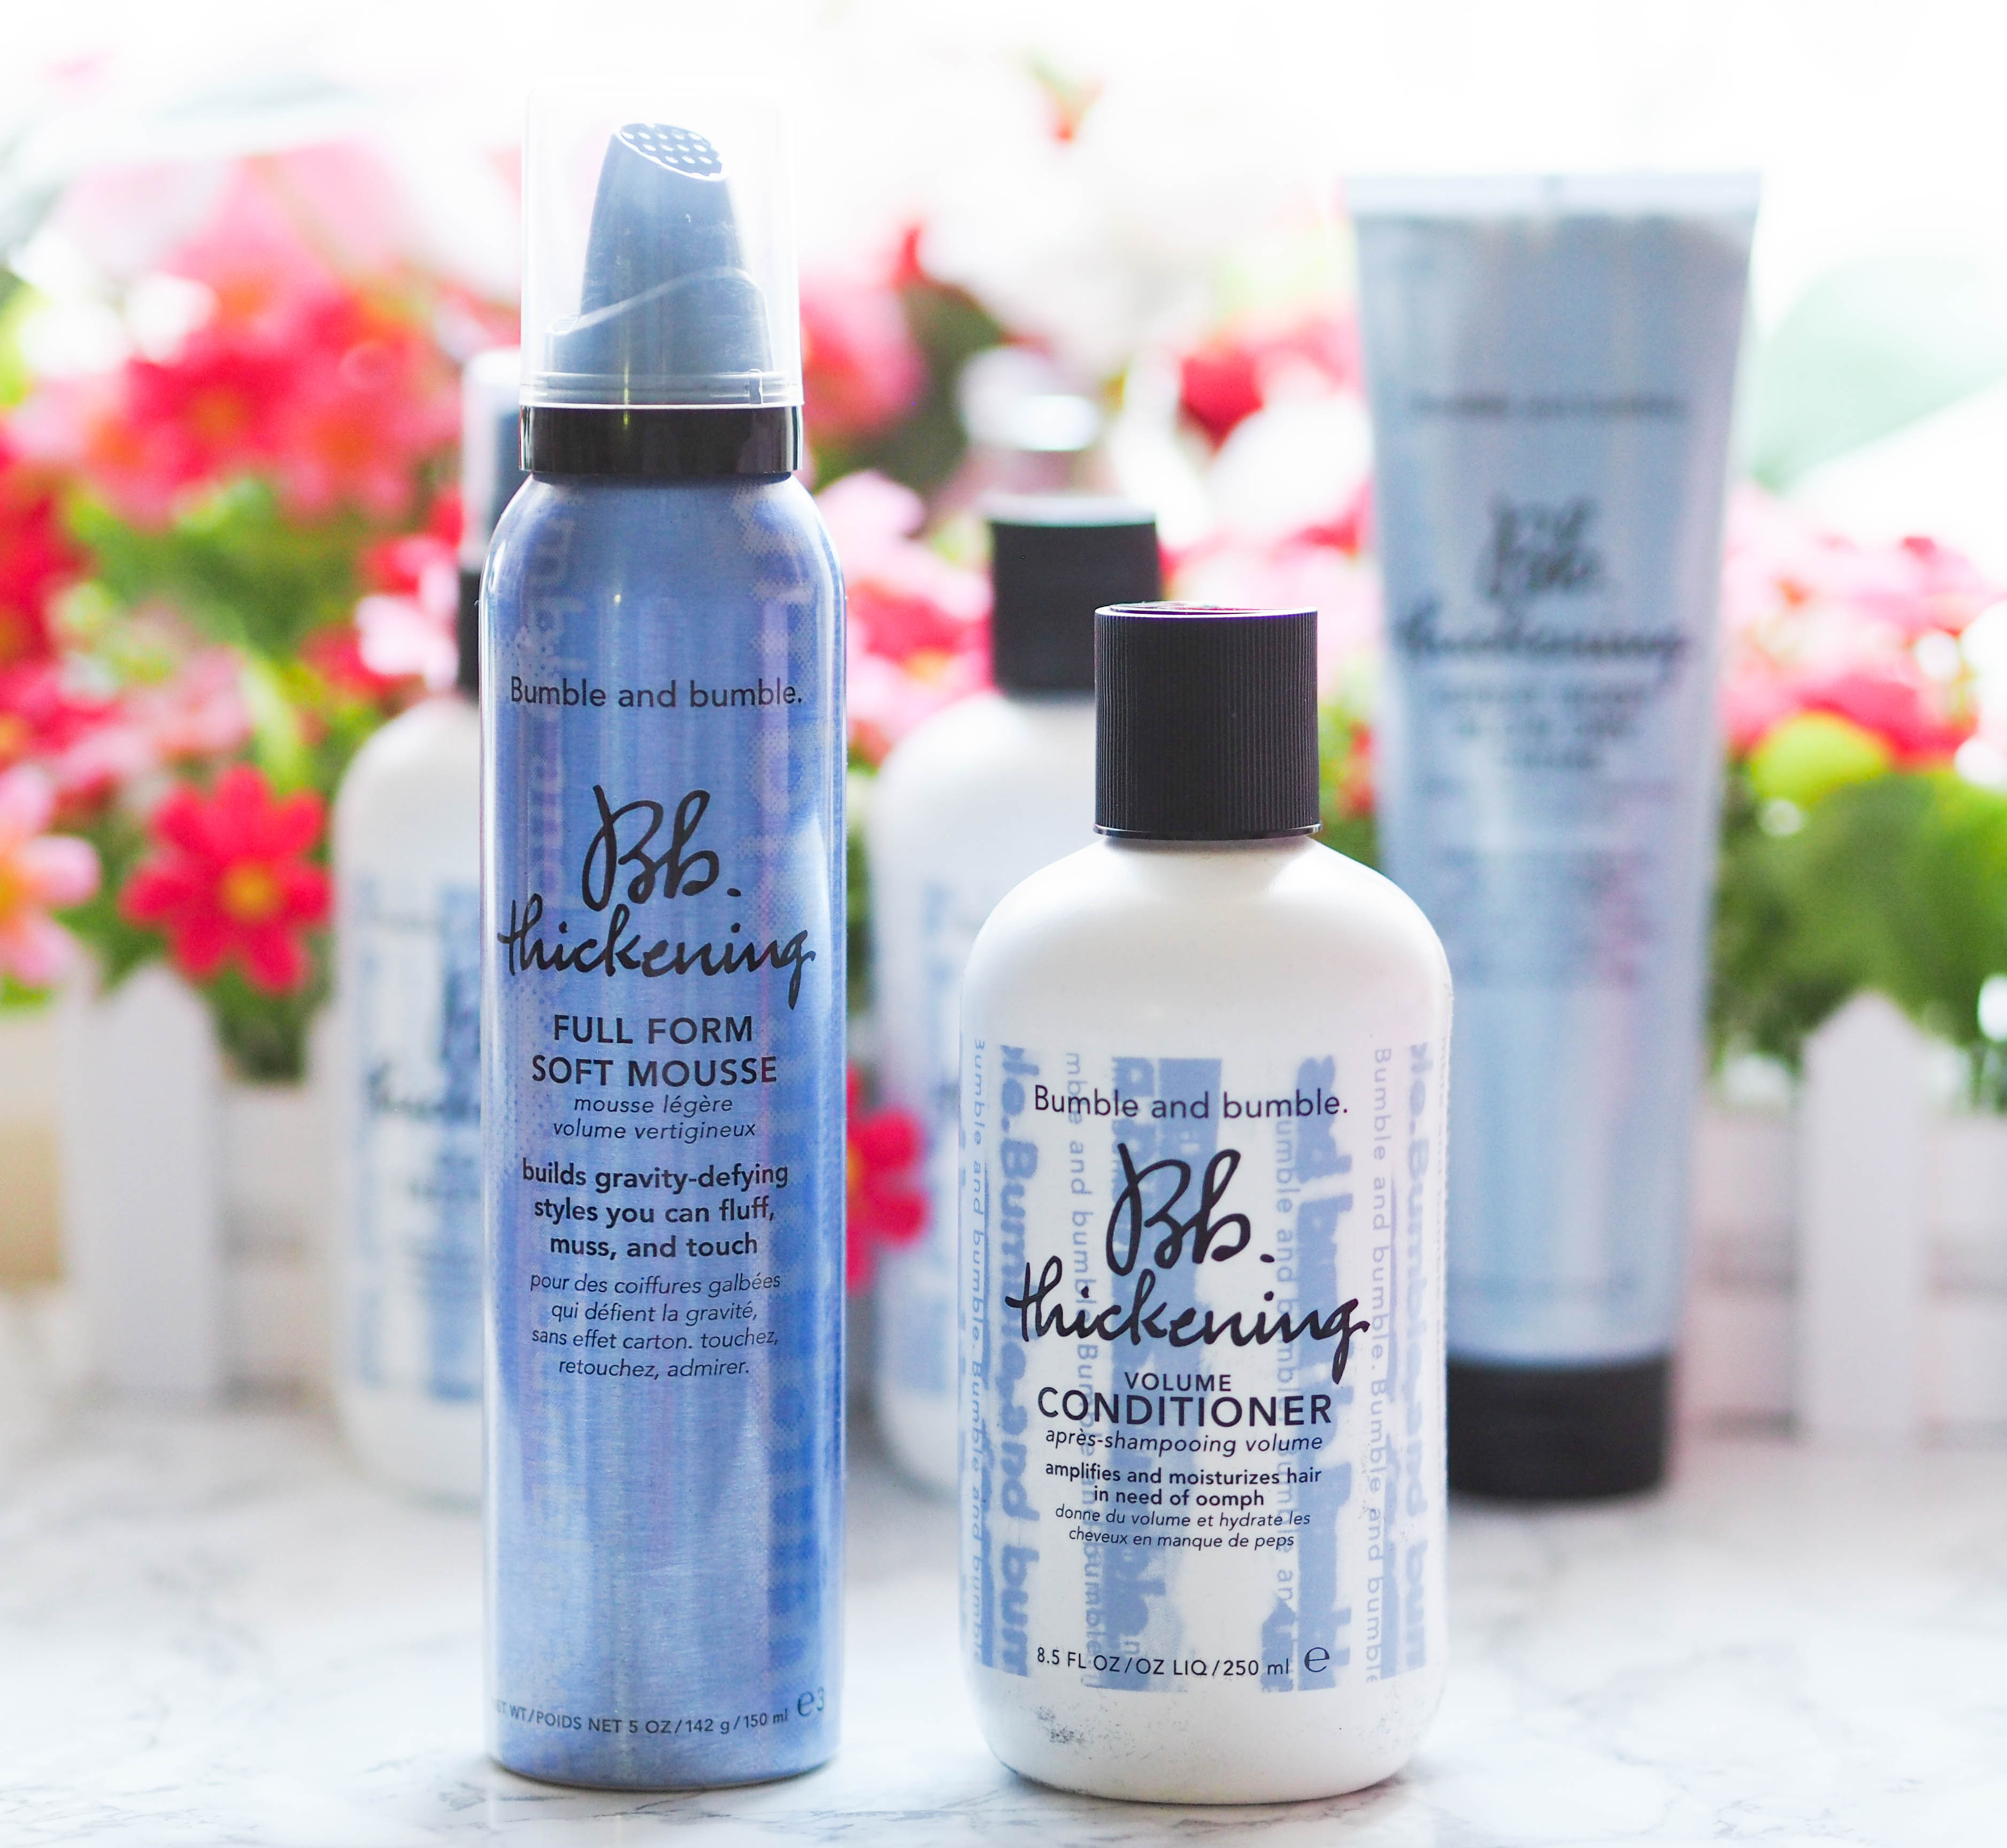 Bumble and Bumble BB Thickening Range - Beauty Geek UK